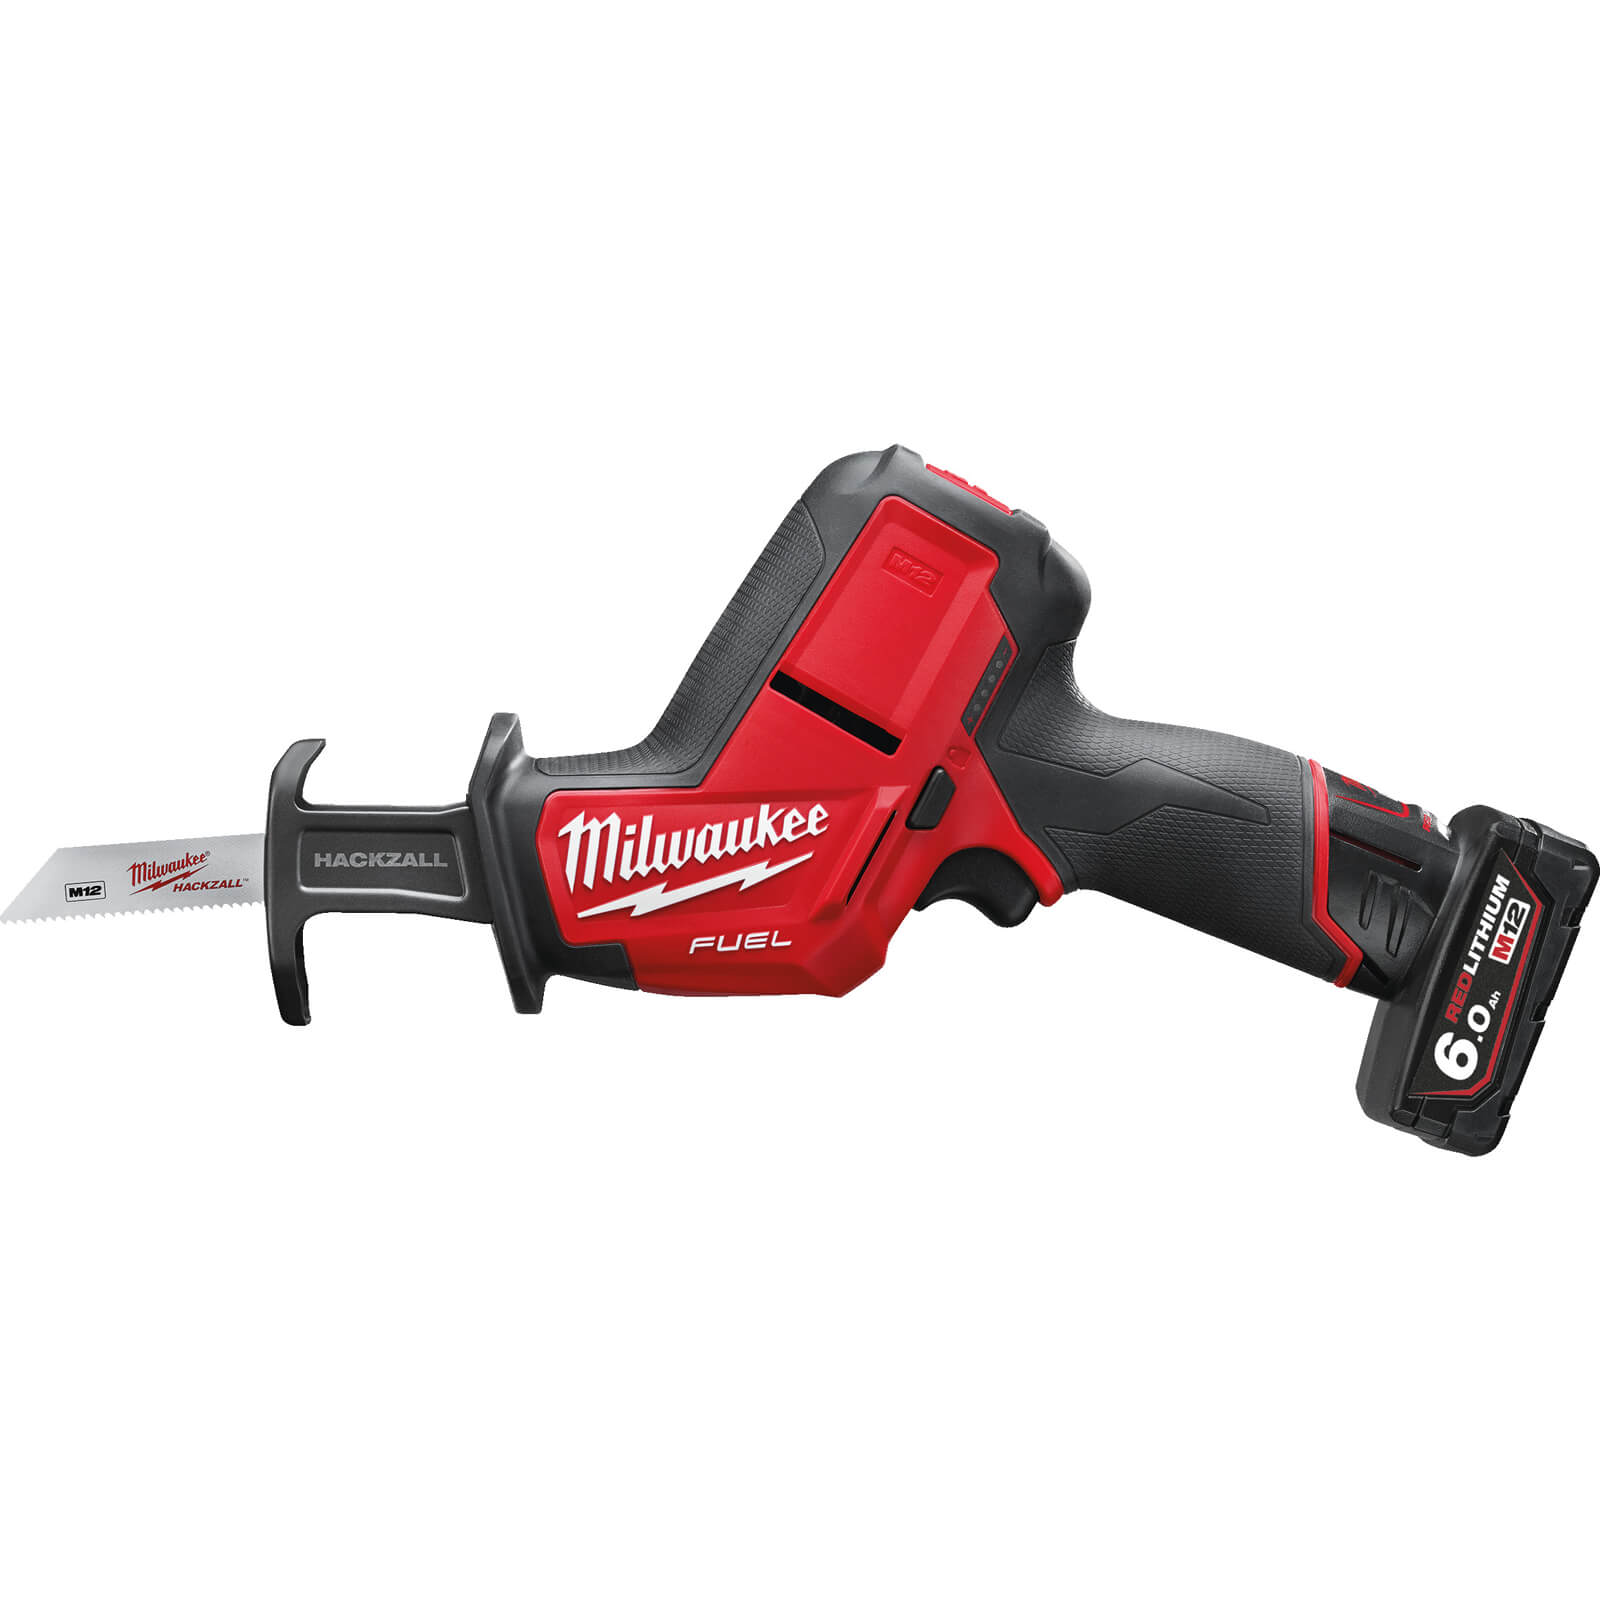 Image of Milwaukee M12 CHZ Fuel 12v Cordless Brushless Reciprocating Saw 2 x 6ah Li-ion Charger Case